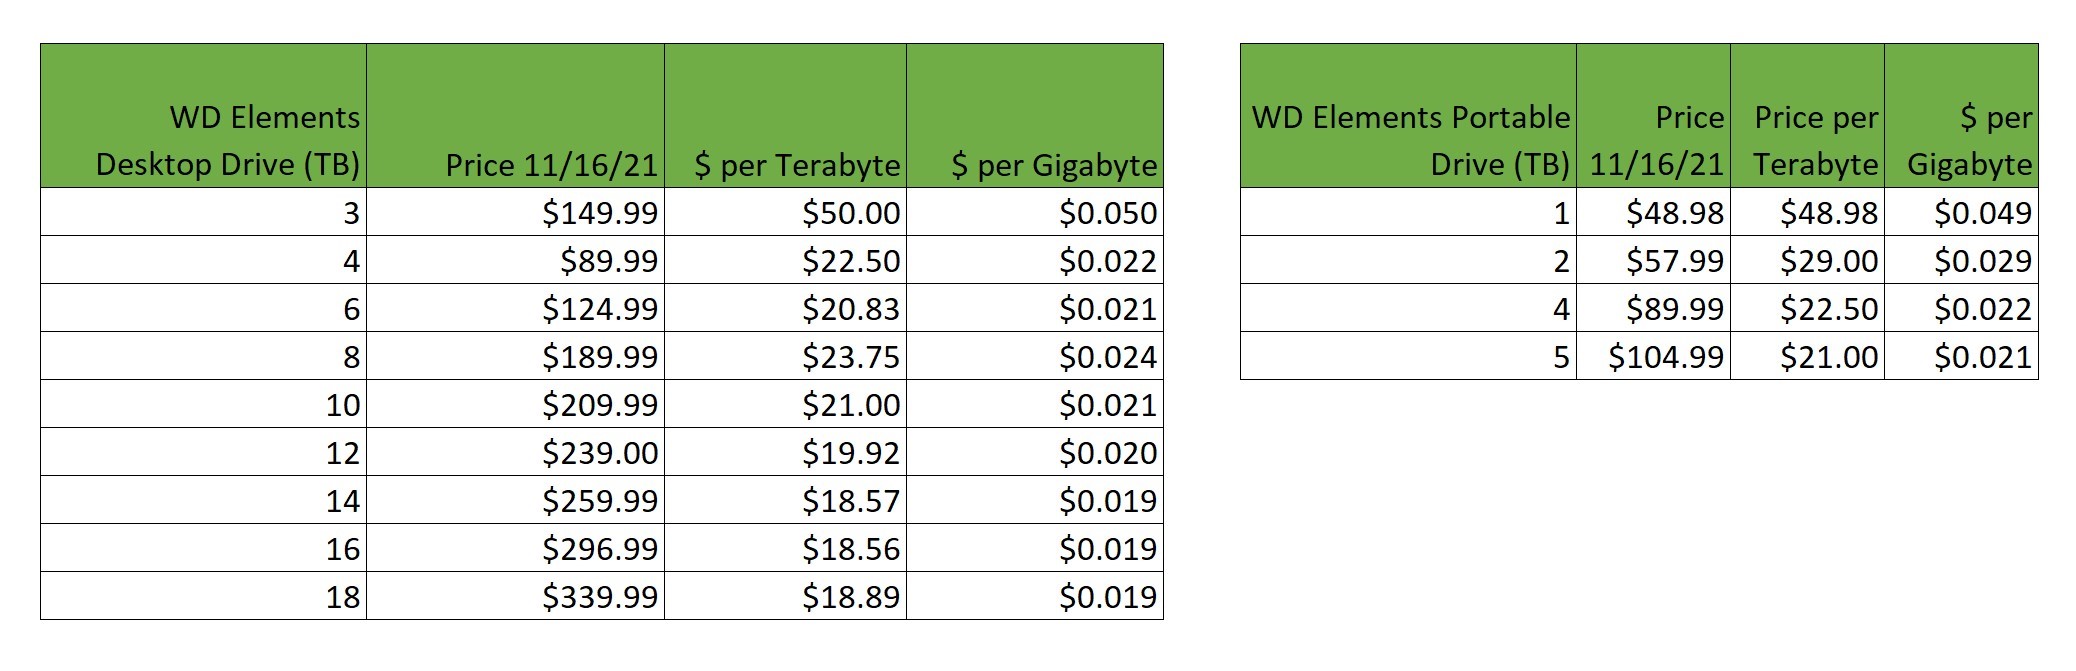 comparison tables of price per terabyte and price per gigabyte on portable hard drives and desktop external hard drives.